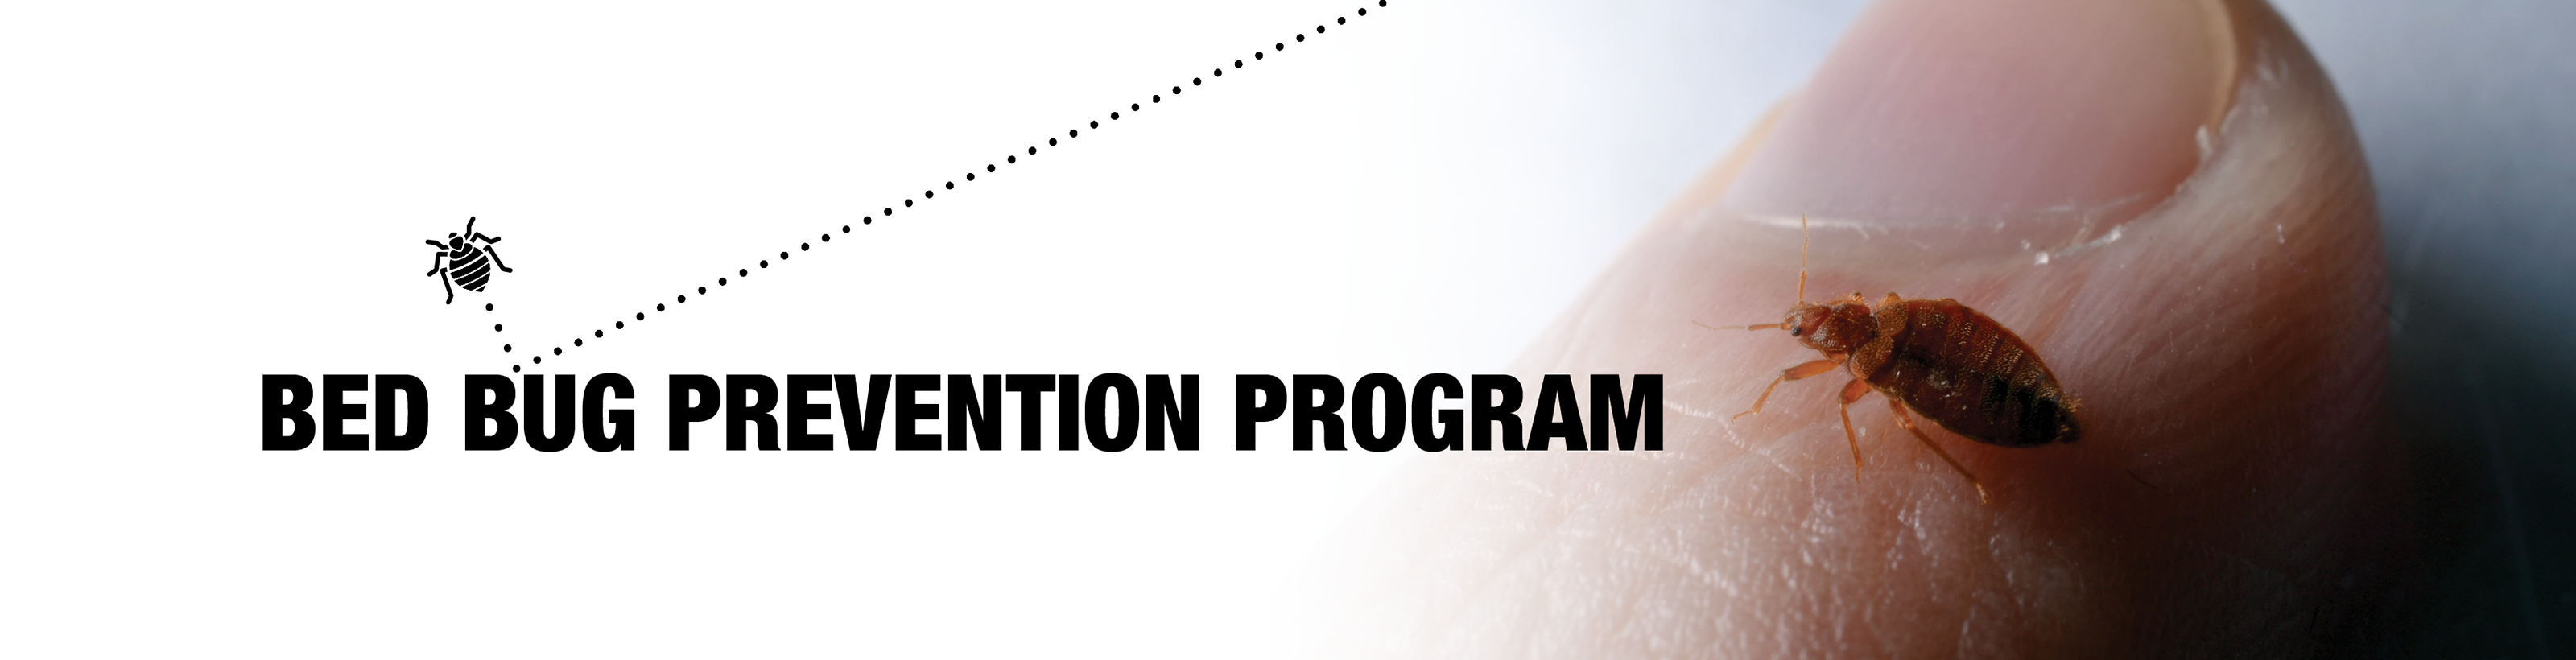 Bed Bug Prevention Program header with an image of a bed bug